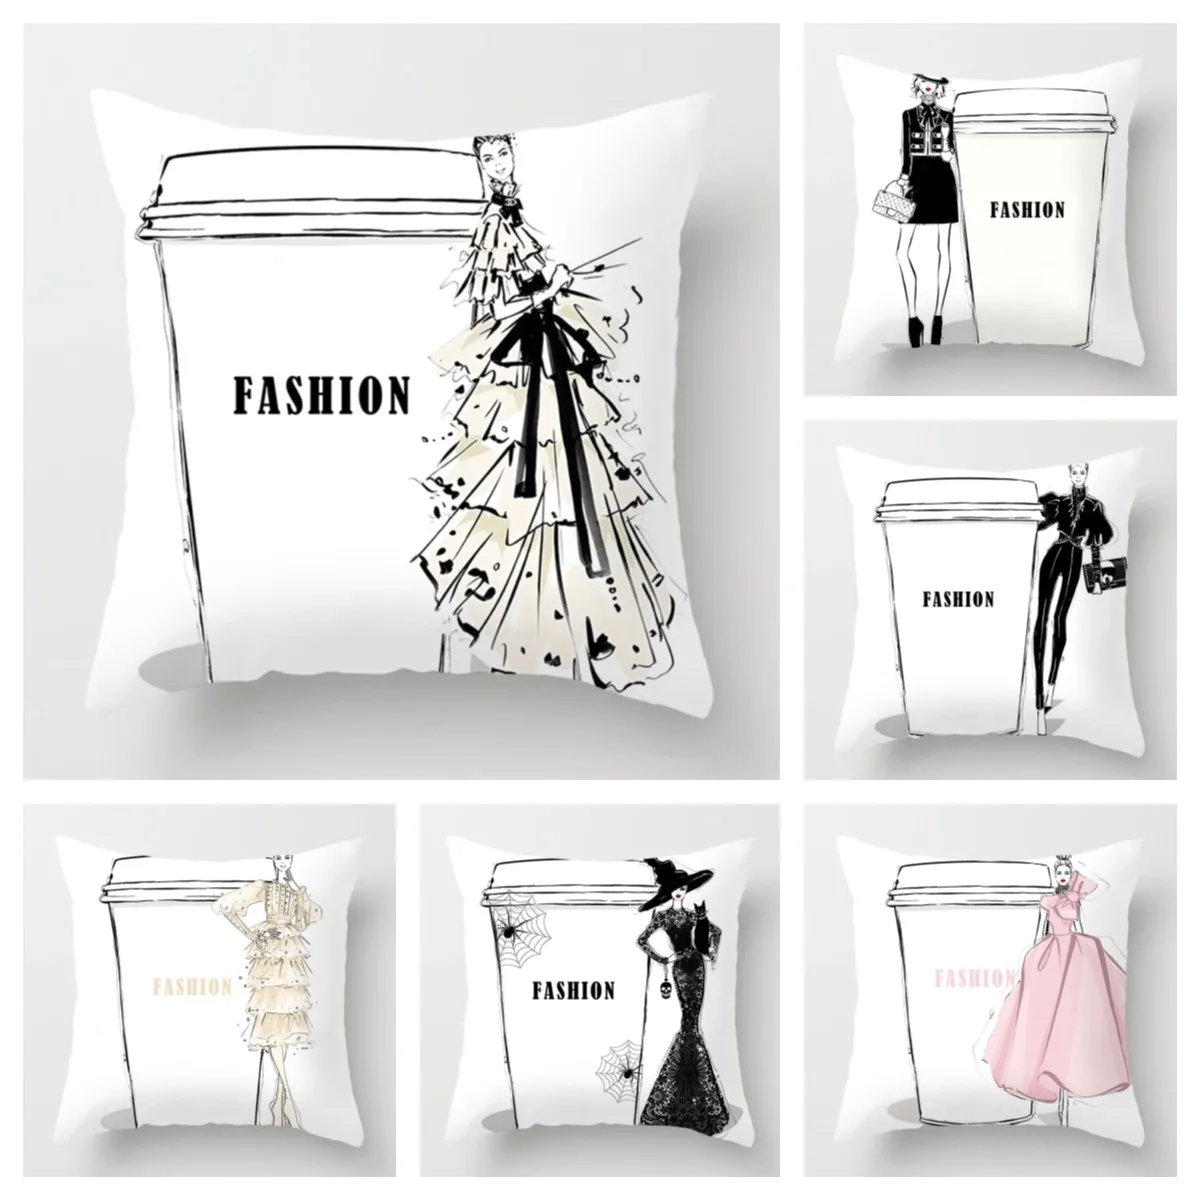 

Fashion Cup Pillow Cover Women's Favorite 50x50 Cushion Cover Home Decor Living Room Sofa Decoration Cushion Cover 60x60 40*40